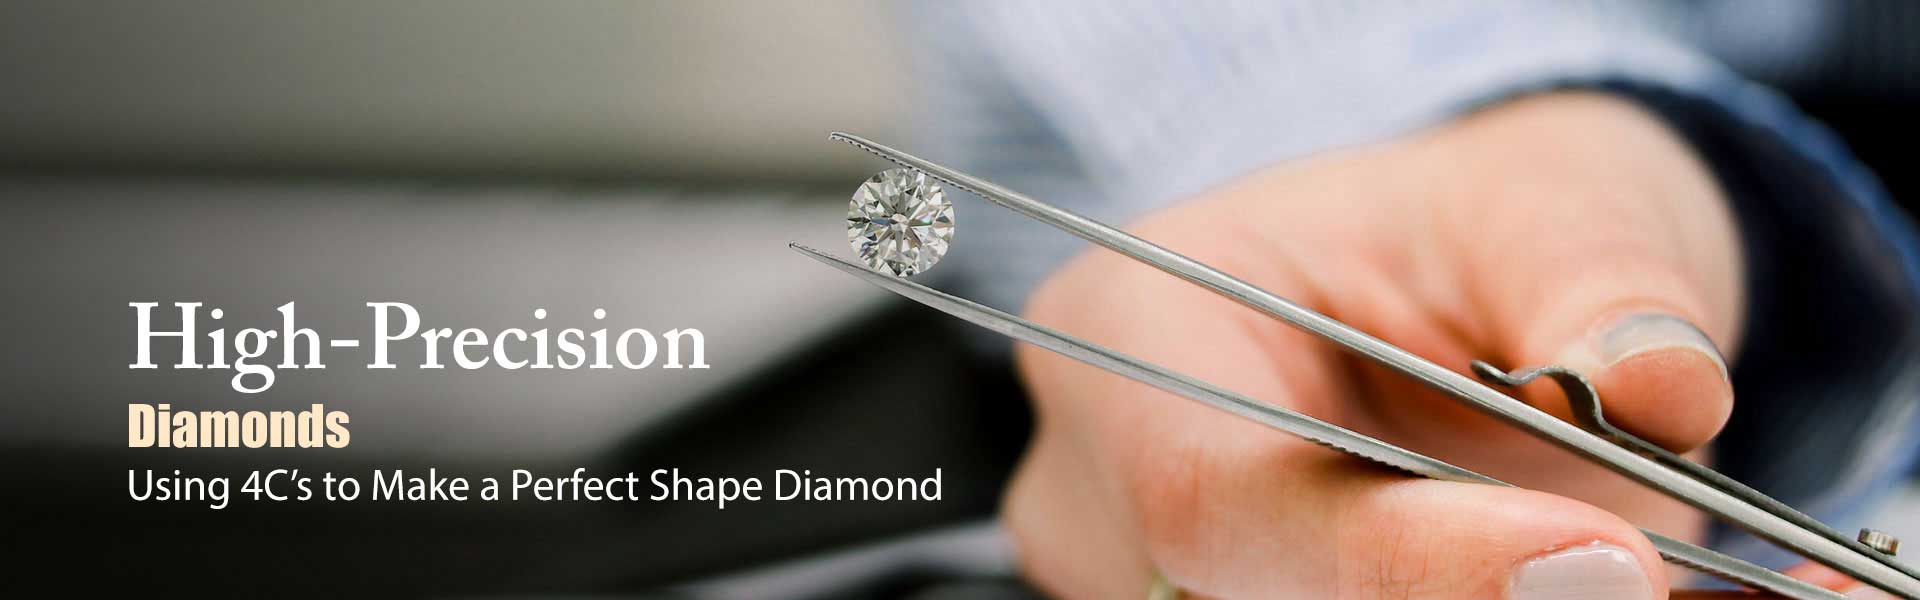  Certified Diamond  Manufacturers in Doha